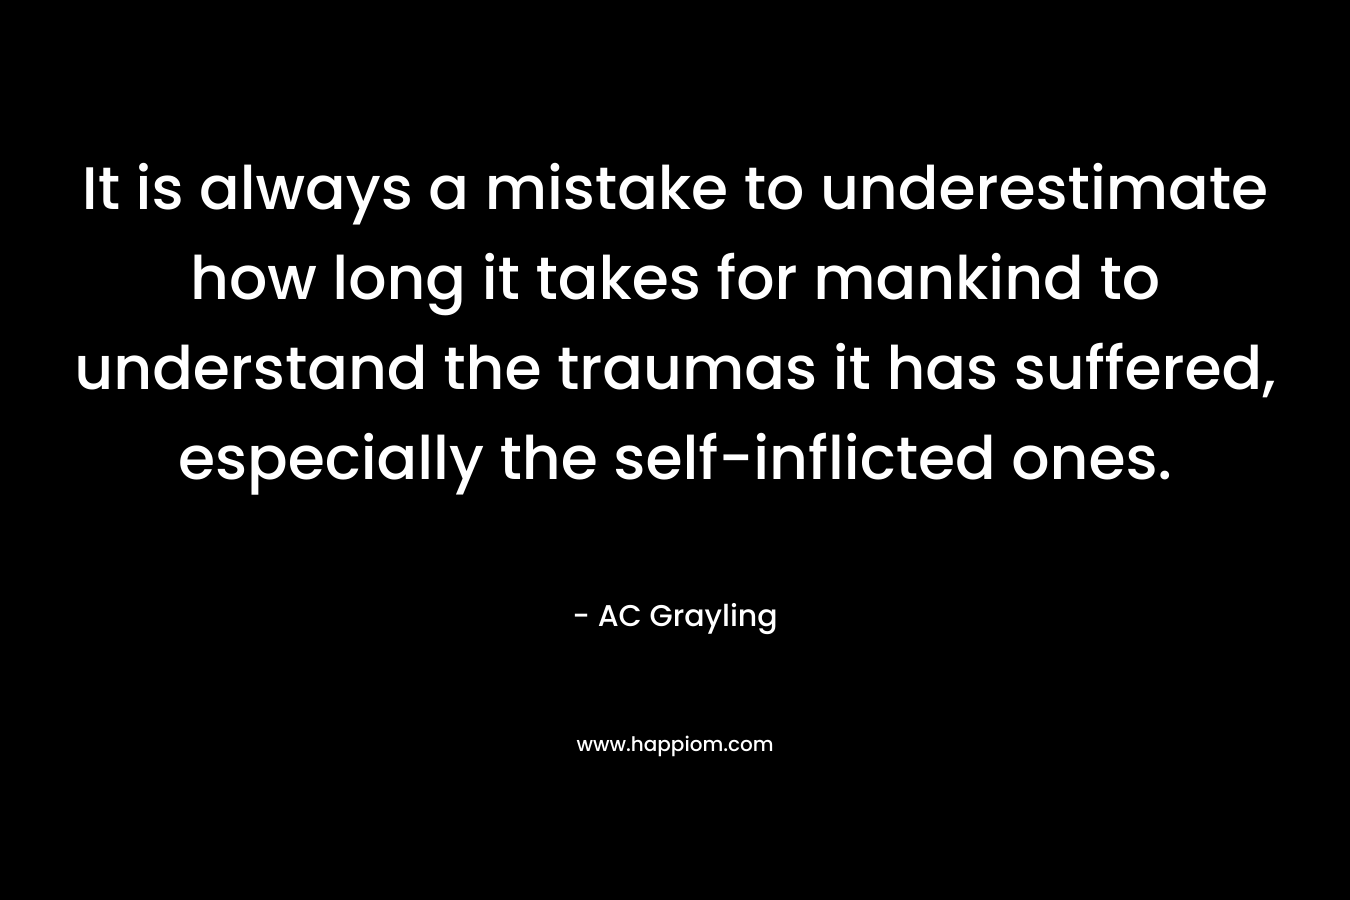 It is always a mistake to underestimate how long it takes for mankind to understand the traumas it has suffered, especially the self-inflicted ones. – AC Grayling